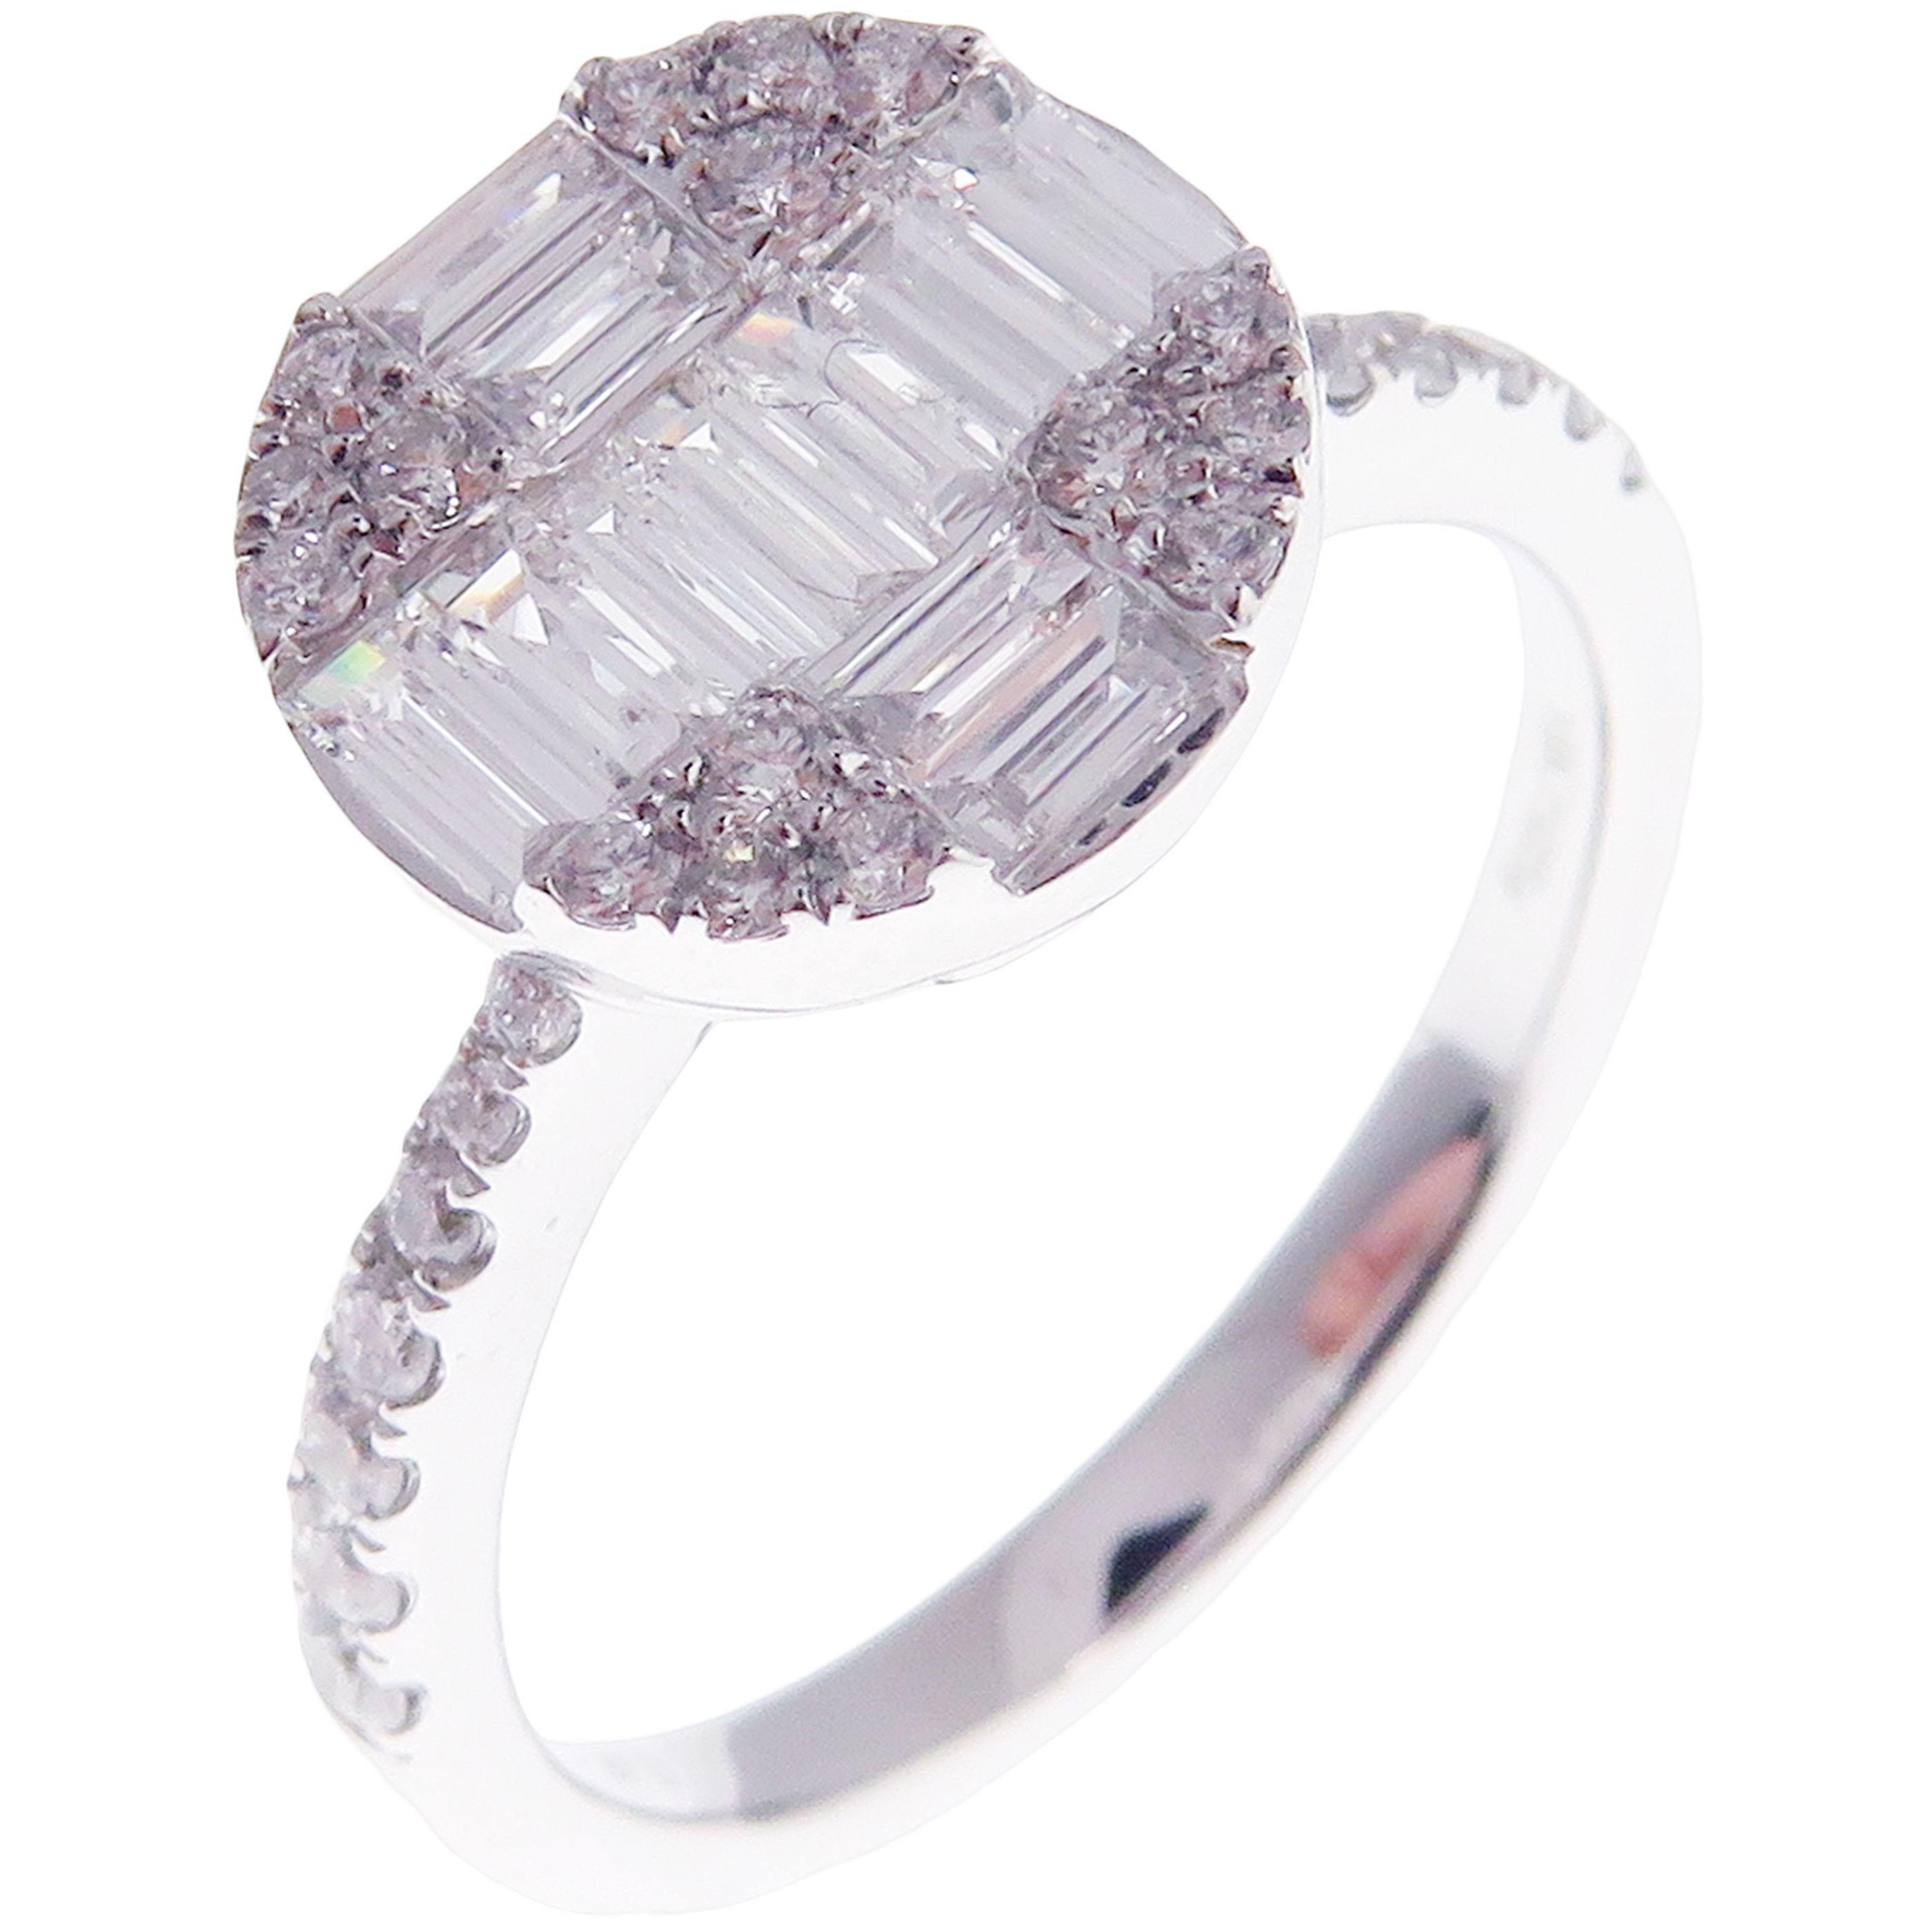 This medium version of diamond solitaire illusion ring is crafted in 18-karat white gold, featuring 30 round white diamonds totaling of 0.26 carats and 11 baguette white diamonds totaling of 0.43 carats.
Approximate total weight 3.06 grams.
Standard